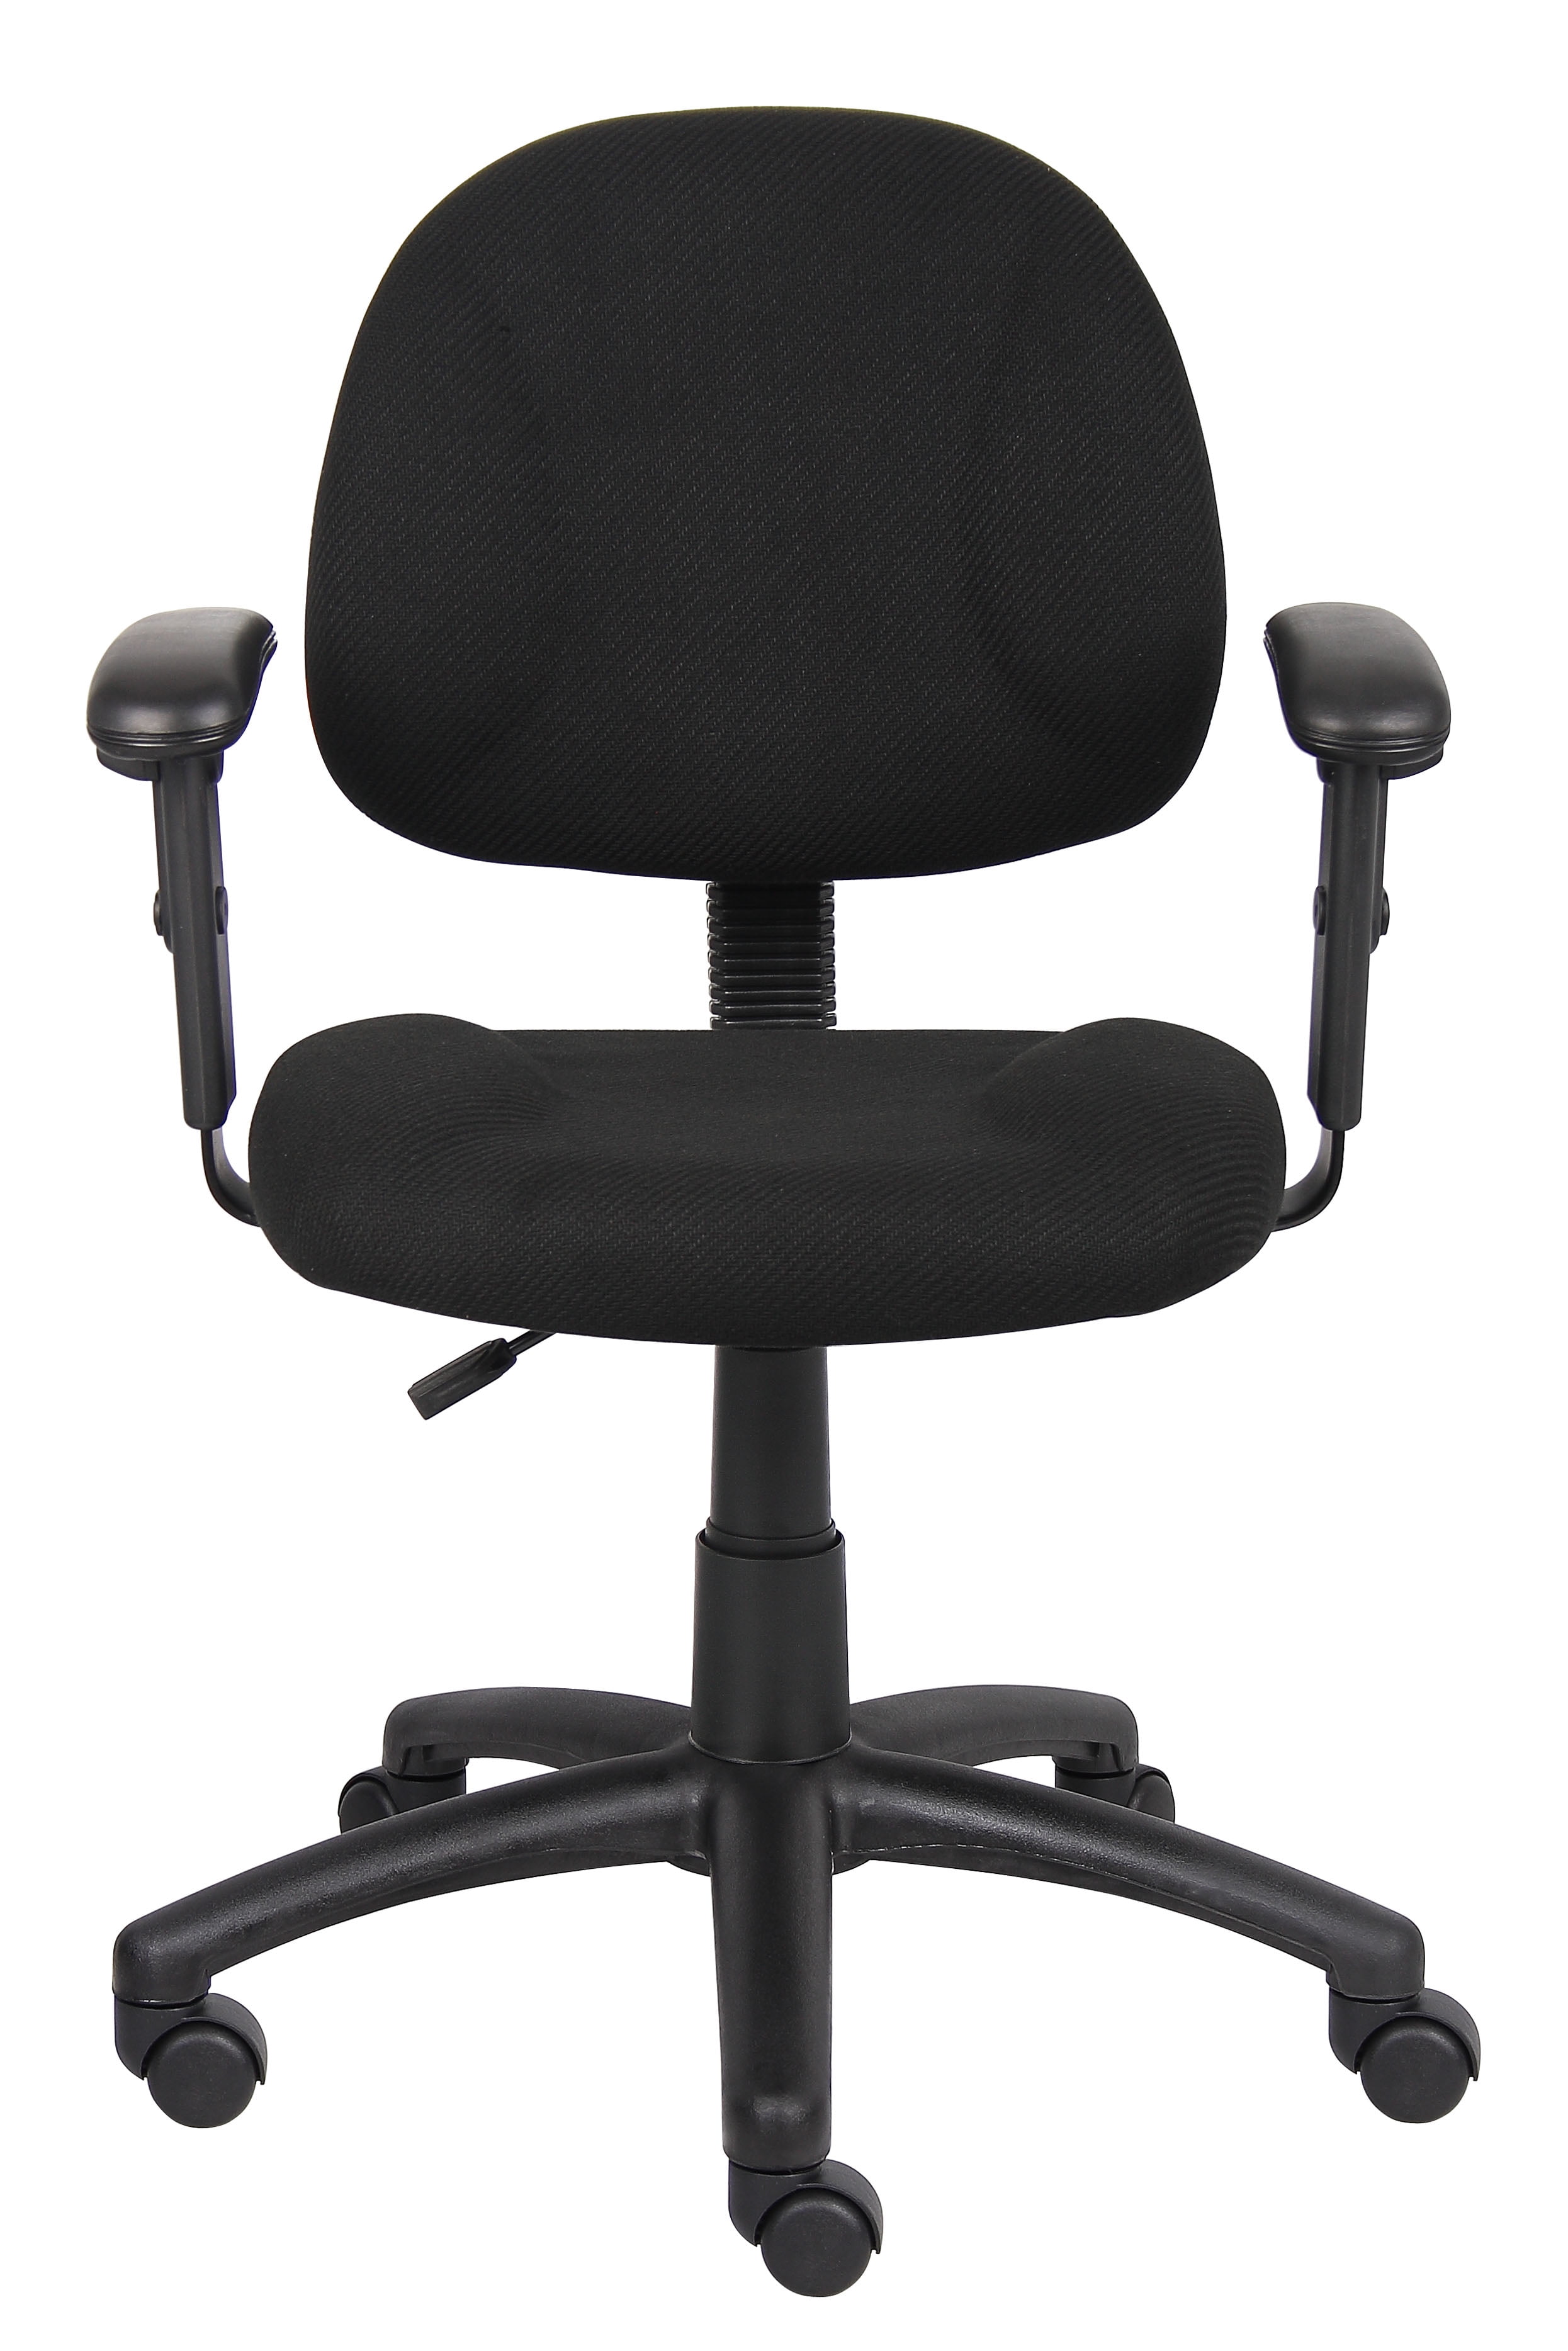 Lacoo Office Drafting Chair with Flip-up Armrests, Black - Walmart.com